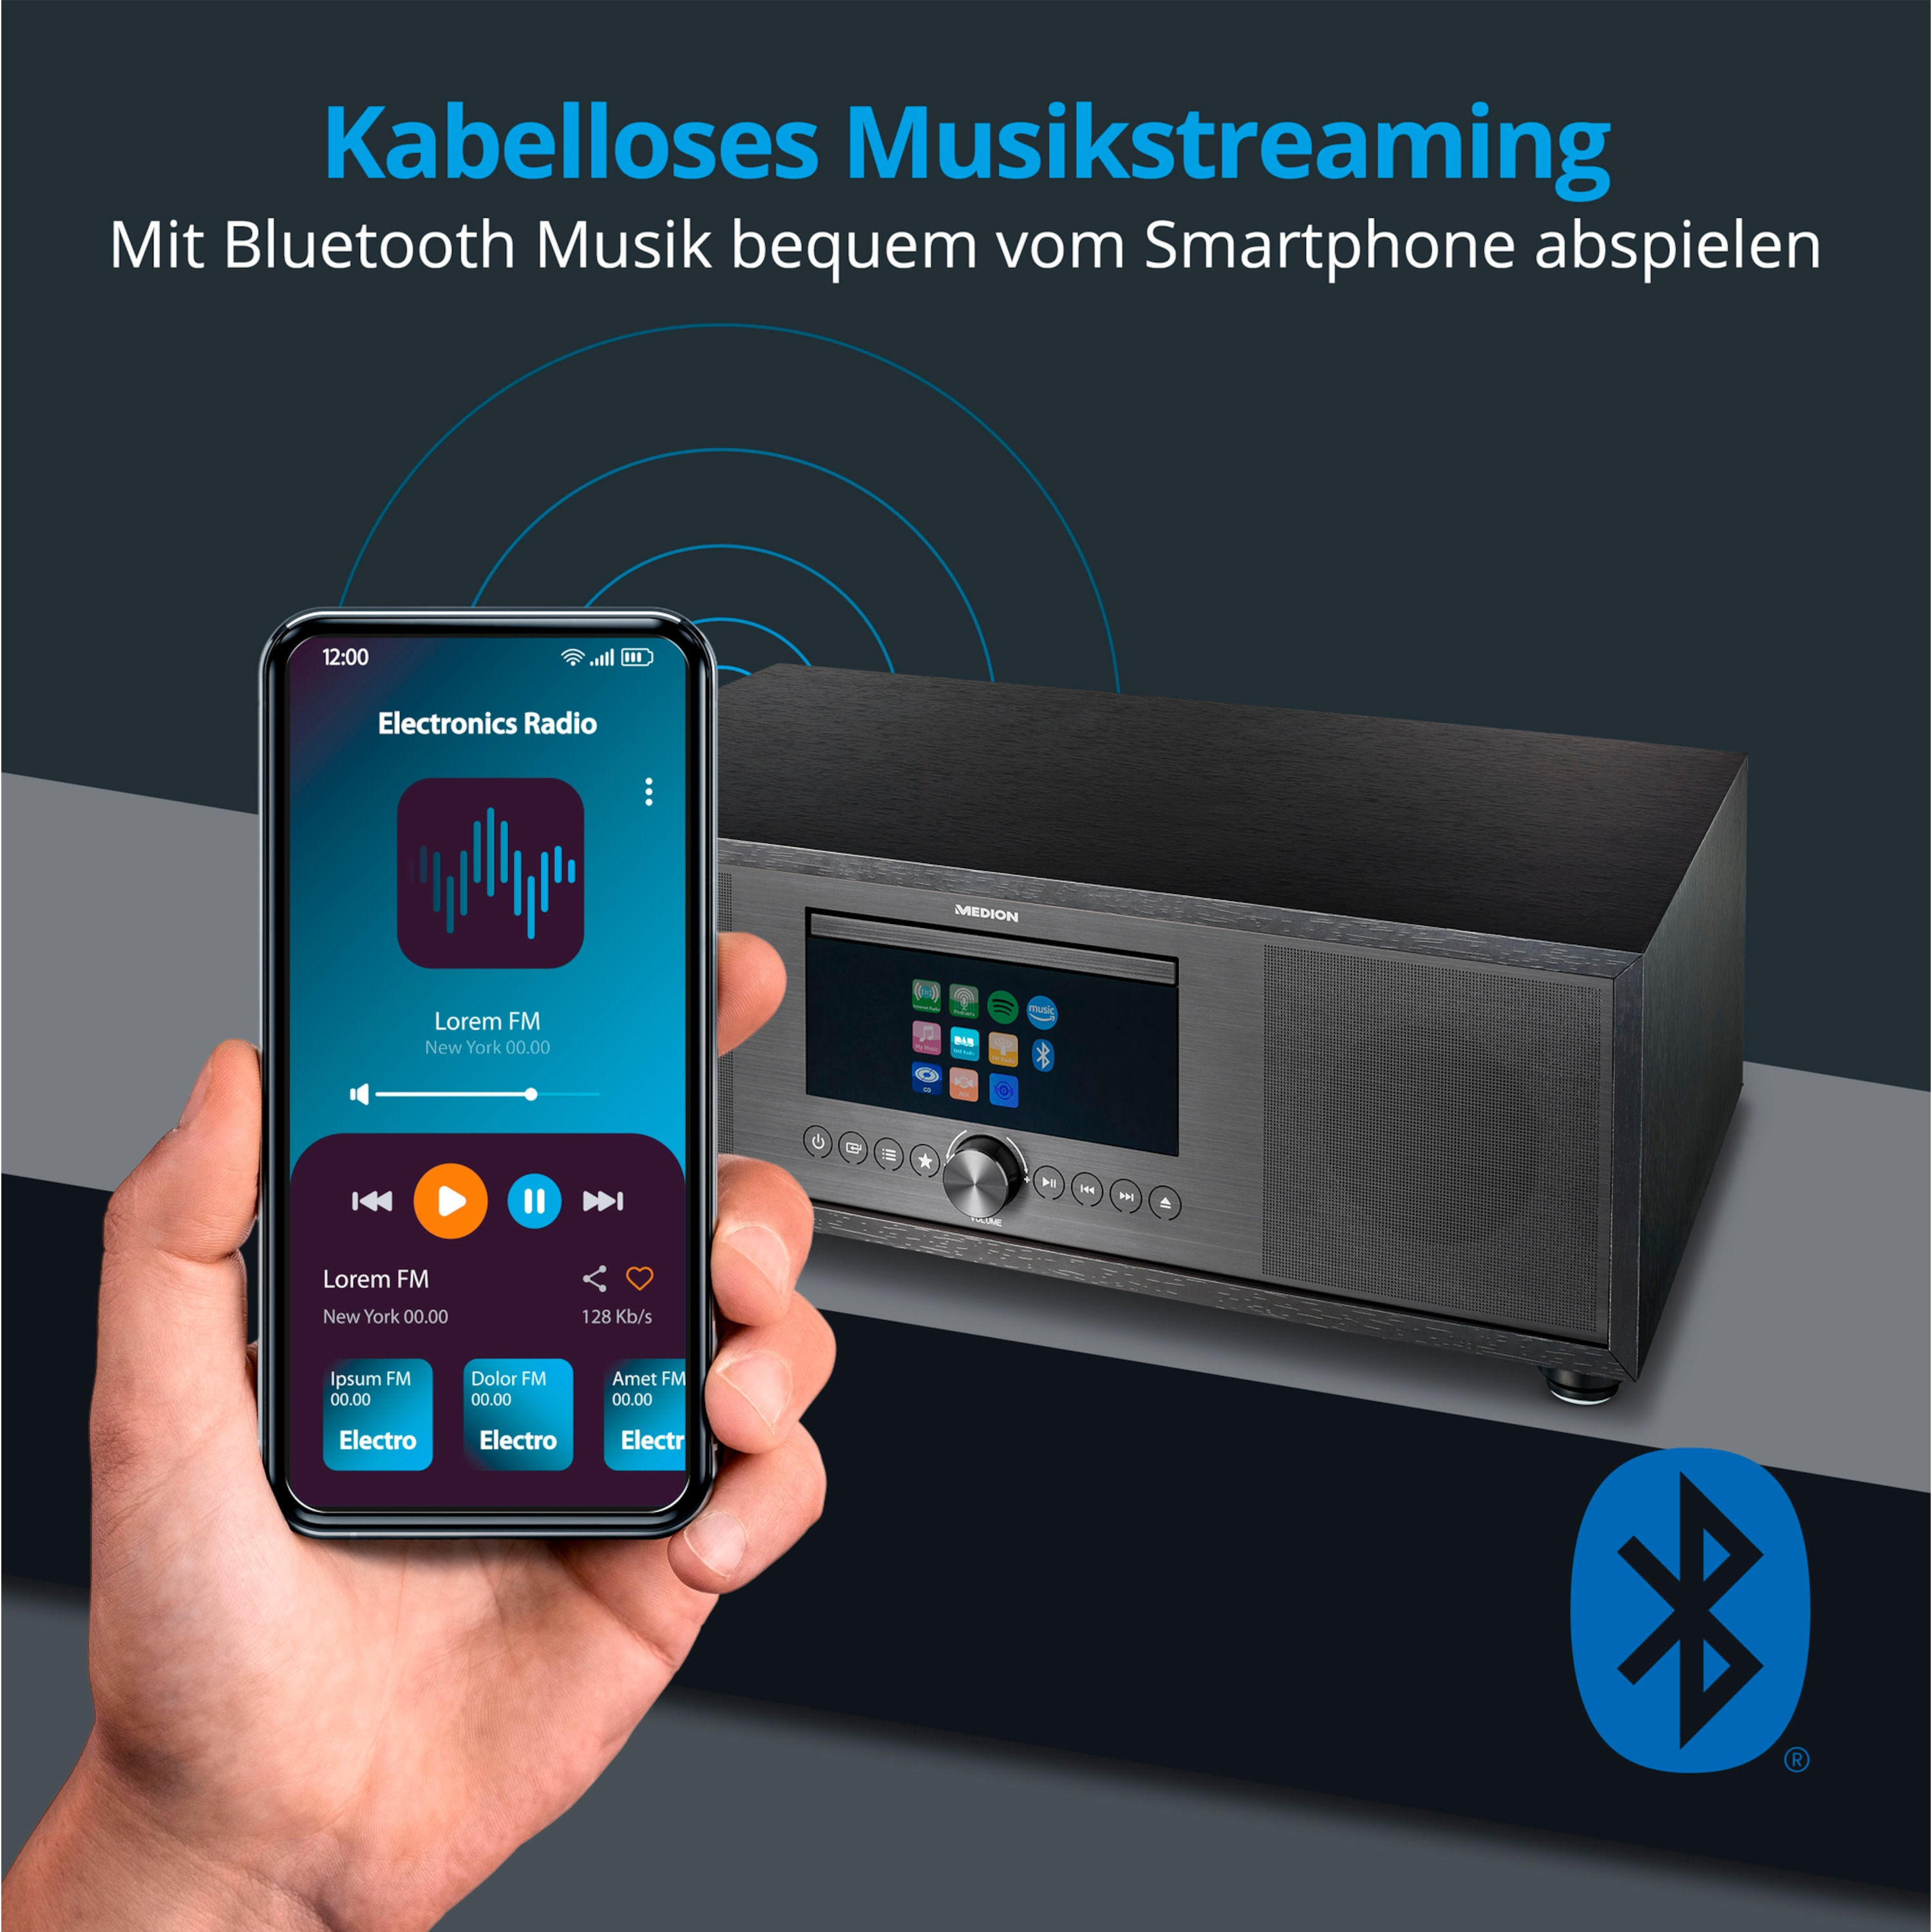 MEDION All-in-One CD/MP3- WLAN Radio, KW, Audio Internet/DAB+/PLL-UKW Internetradio, System, P66400 Player, Bluetooth®, LIFE® anthrazit